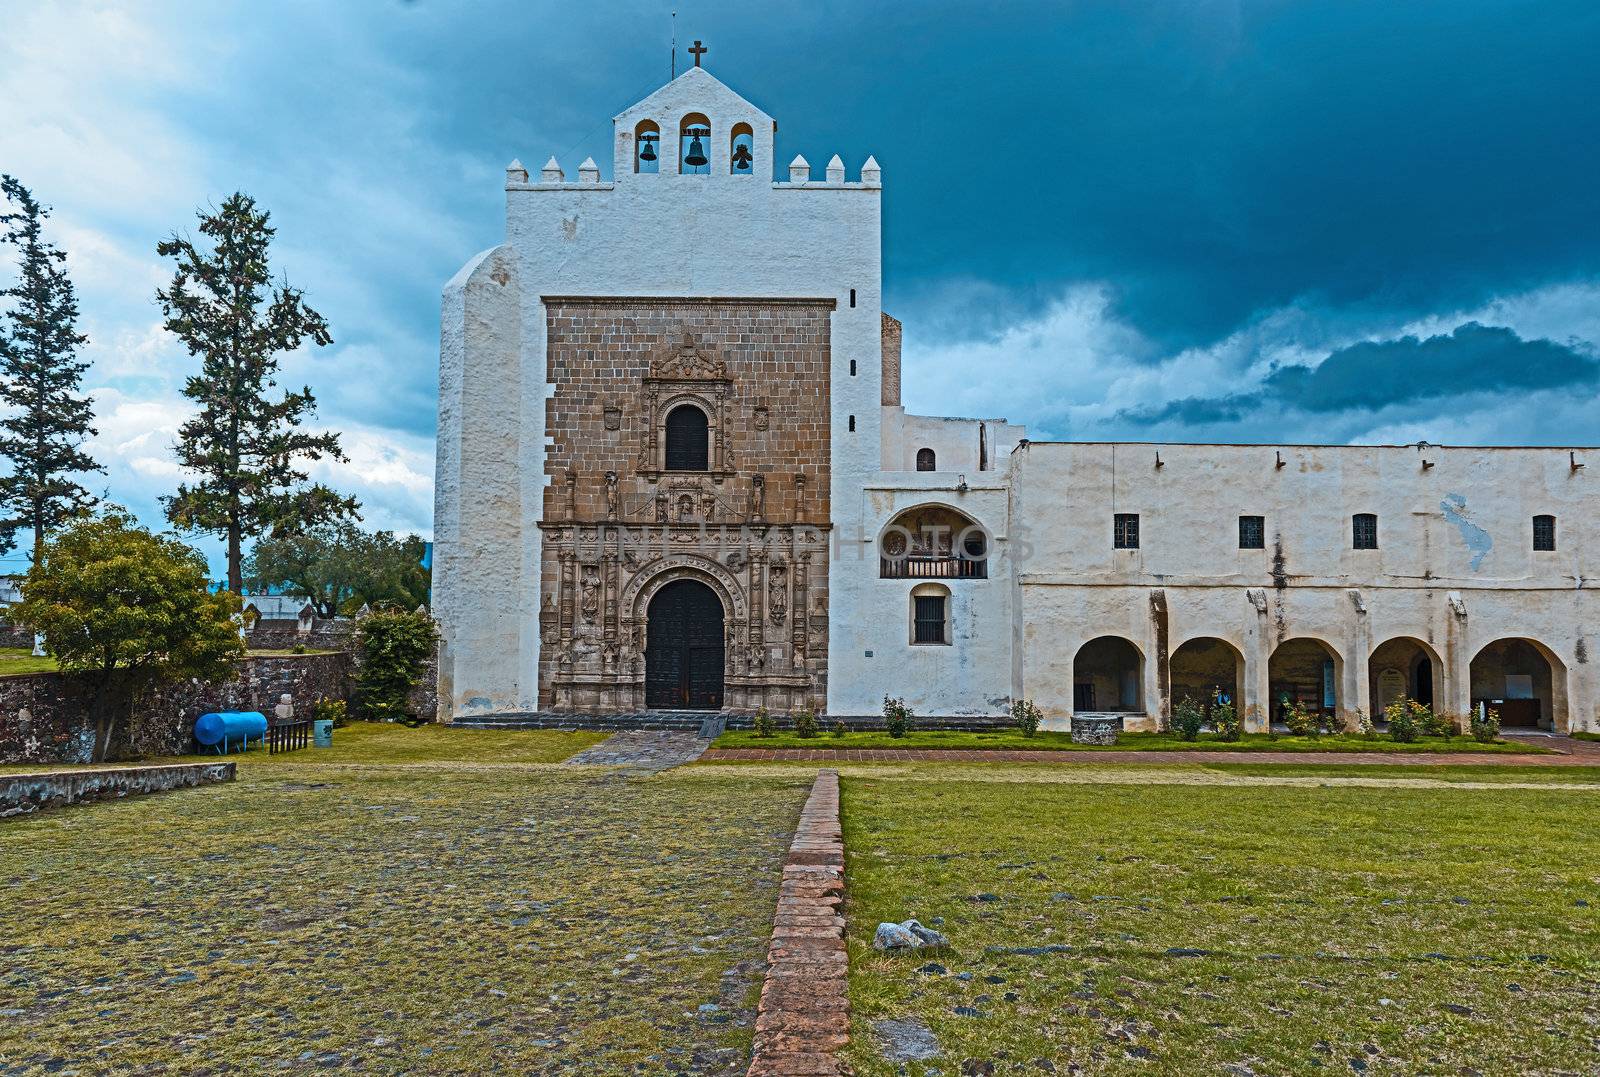 monastery of San Agustin in town of Acolman, Mexico by Marcus